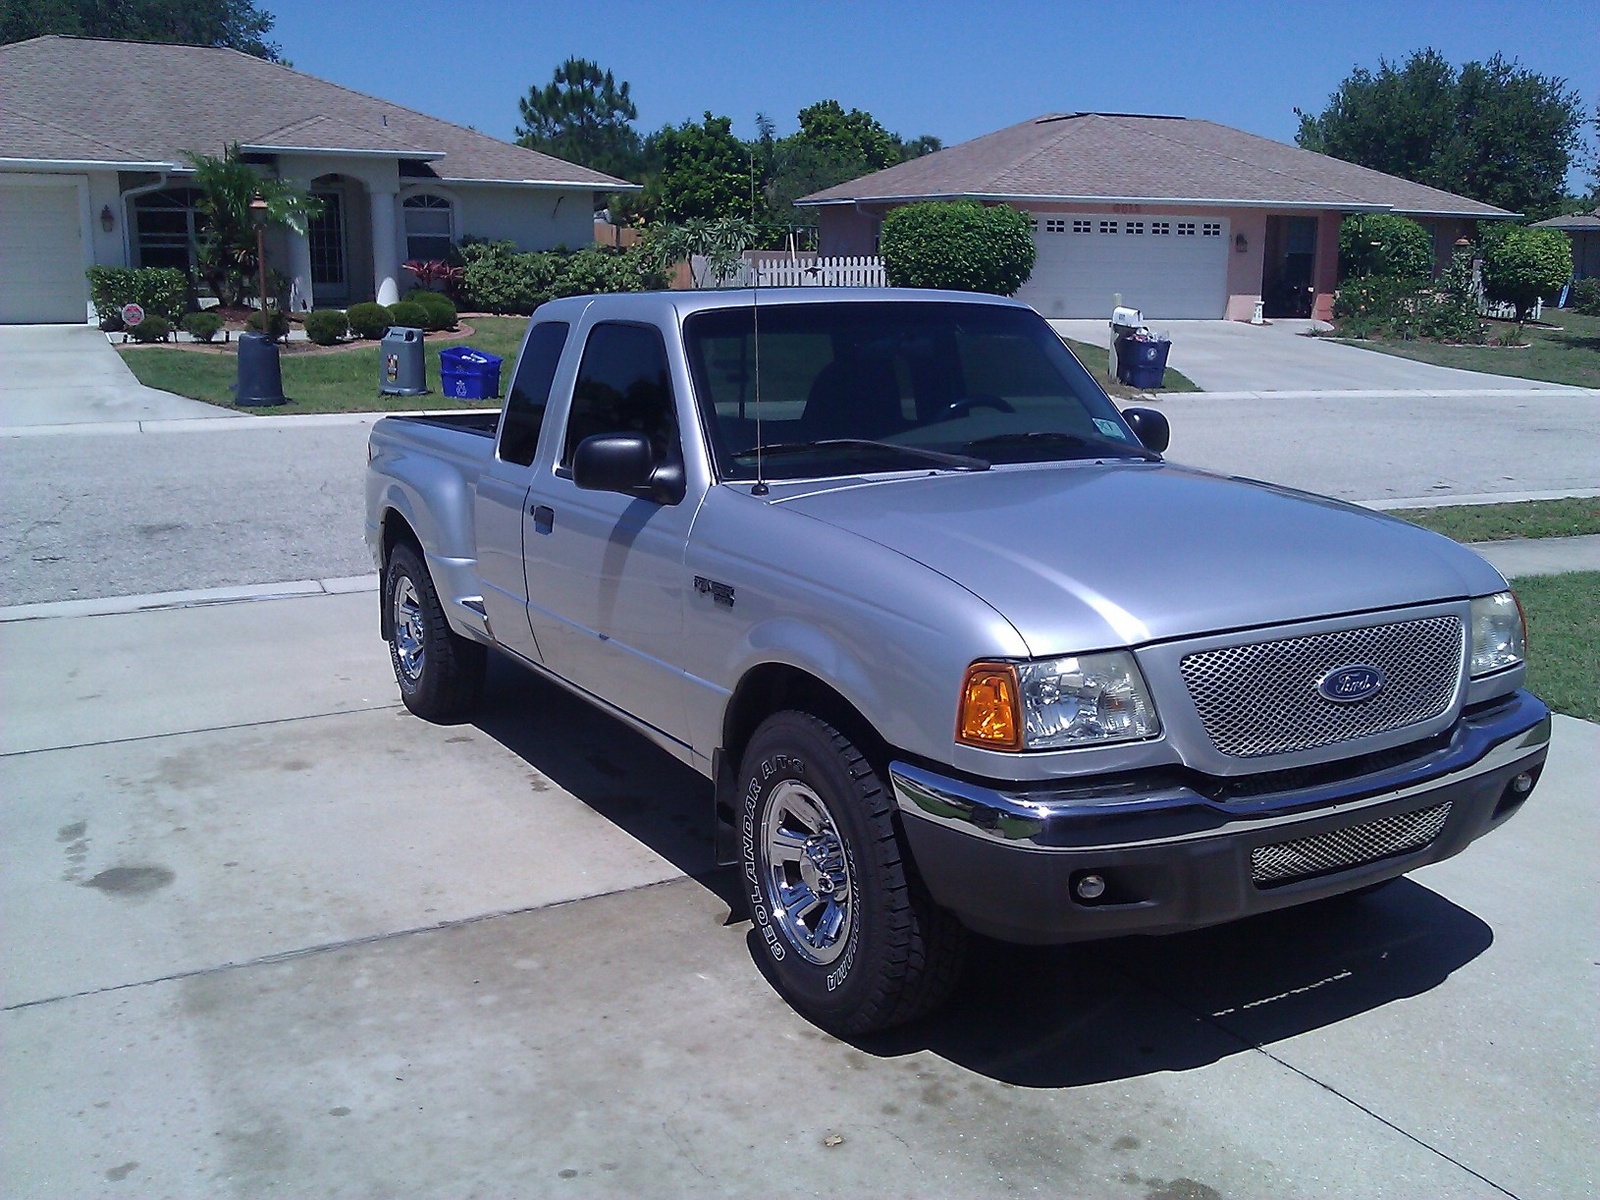 2002 Ford ranger extended cab weight #3